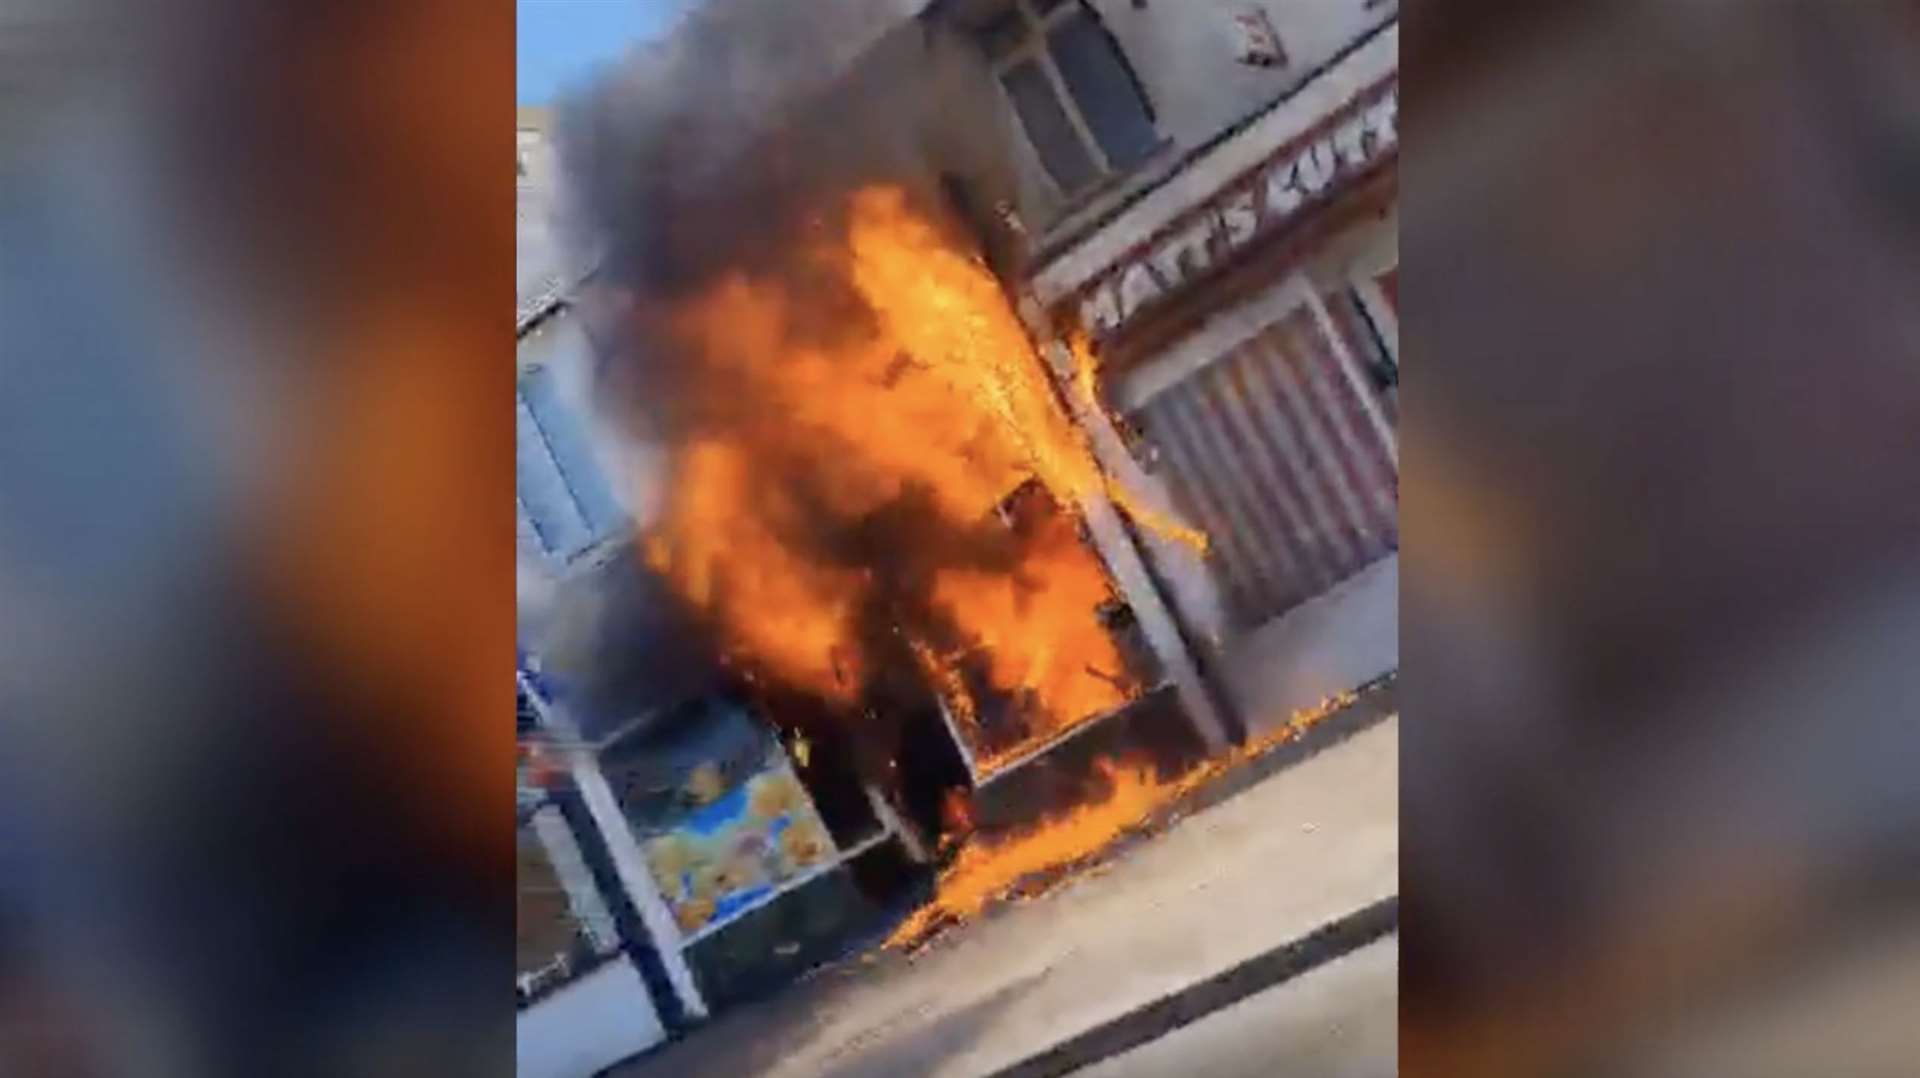 A fire has broken out at a kebab shop in Herne Bay